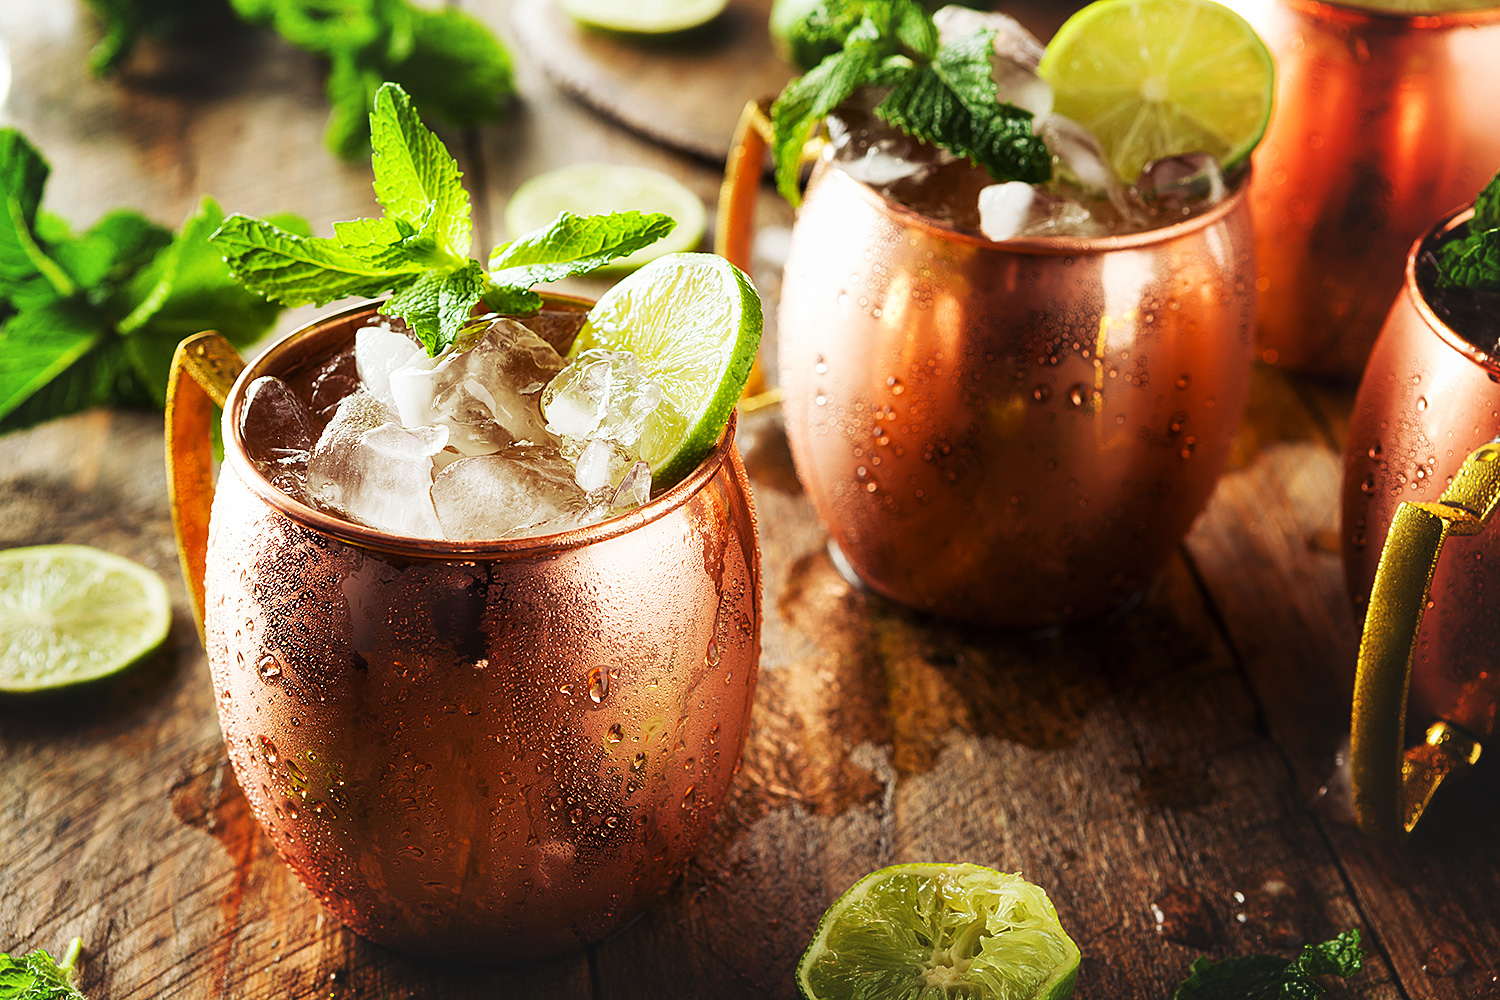 Moscow Mule cocktails with vodka, mint and lime in copper mugs on a wooden board